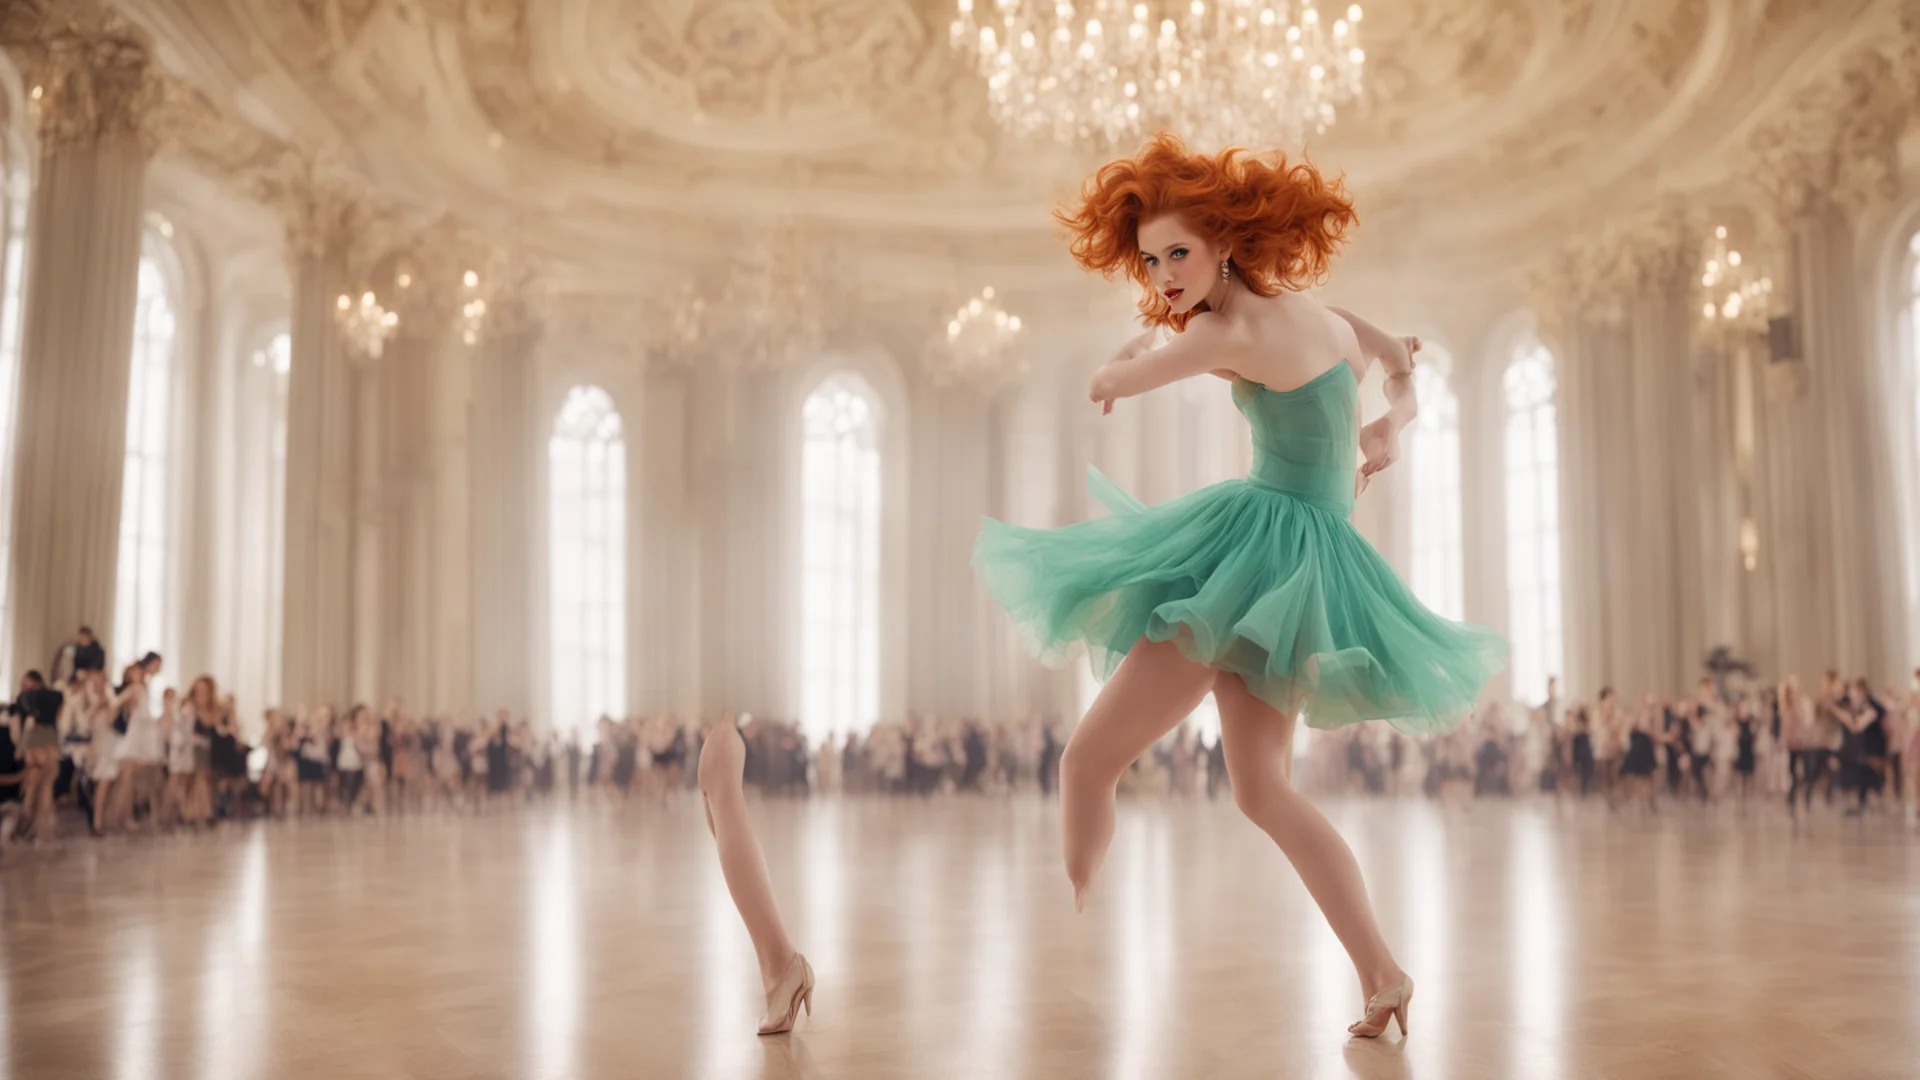 aia ginger haired girl with short skirt dancing in a gigantic ballroom wide